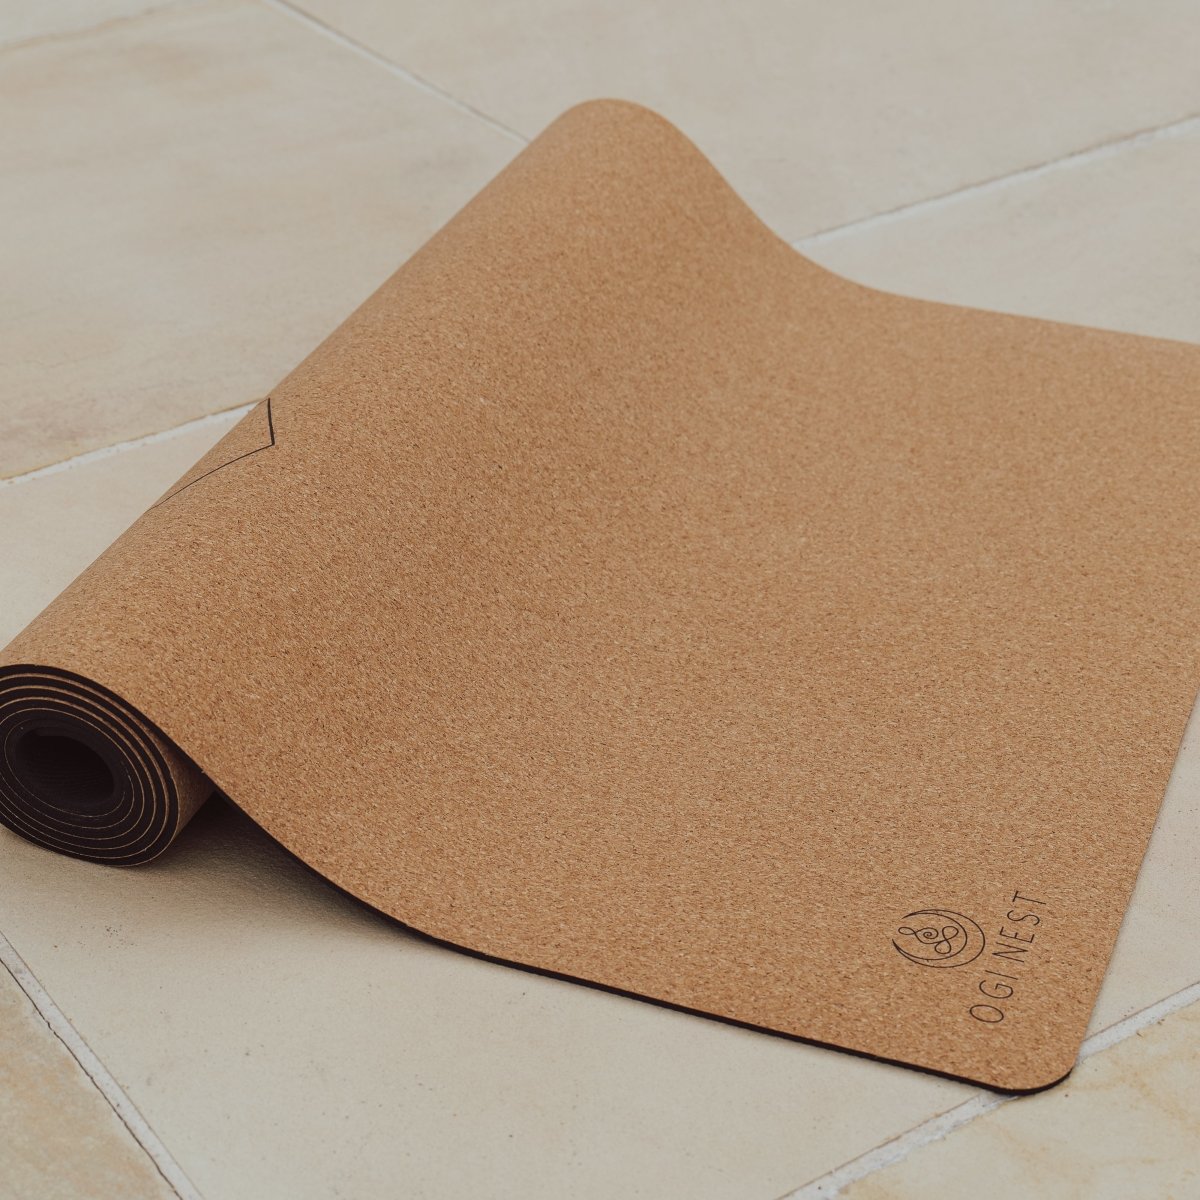 Bee cork and natural rubber yoga mat partially rolled up.